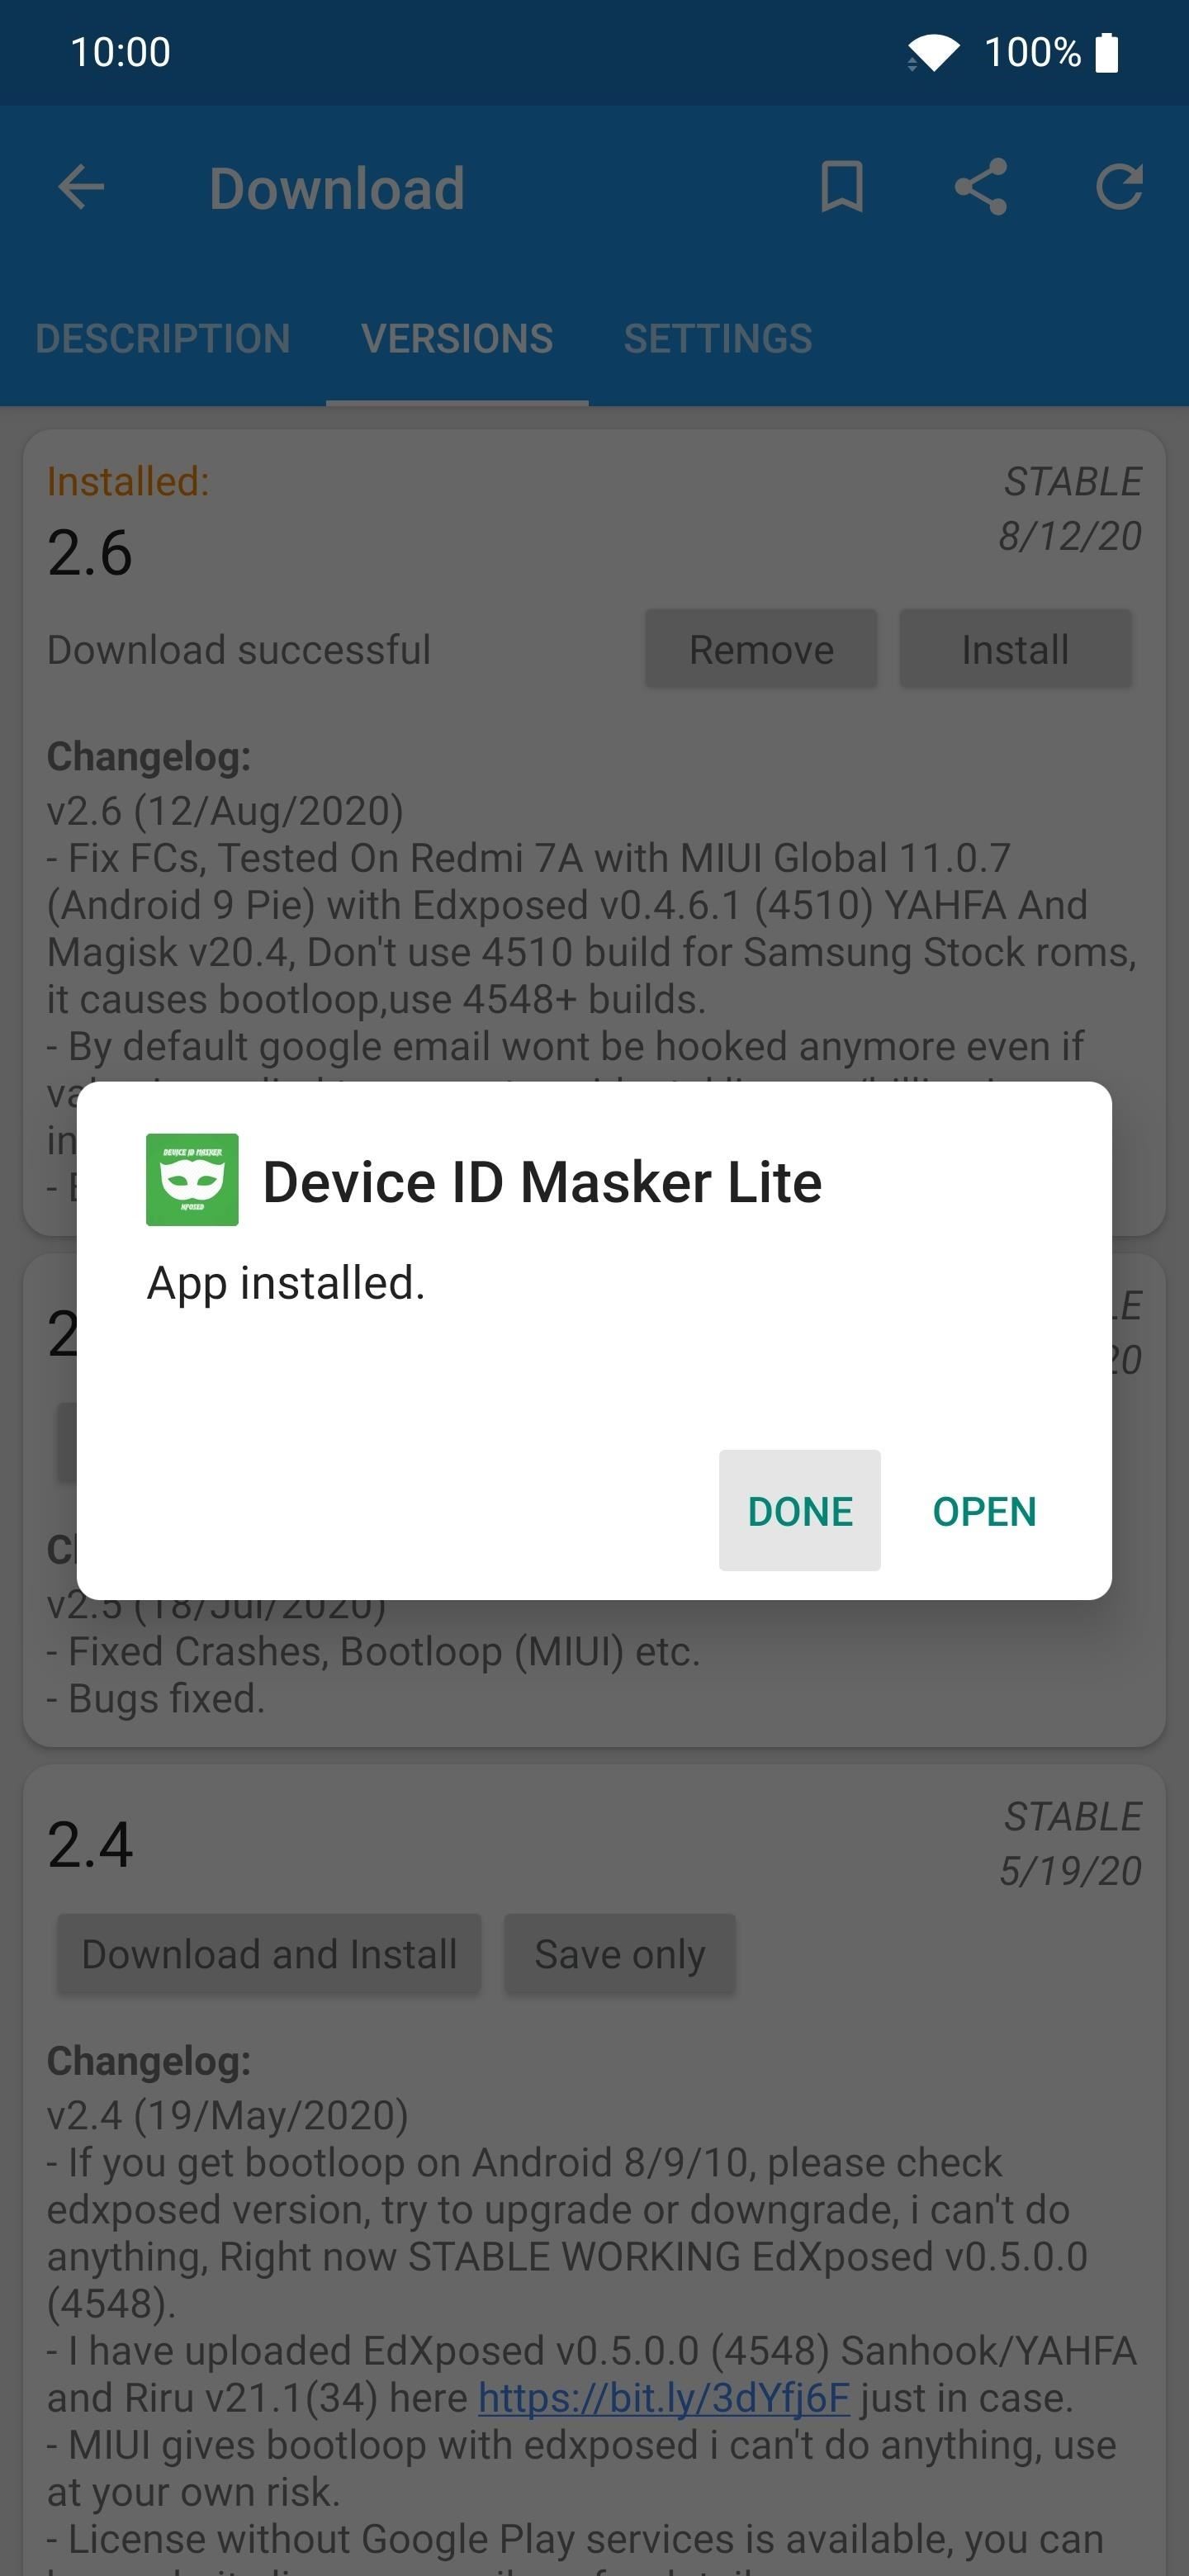 How to Keep Apps from Collecting Data About Your Phone by Spoofing Device ID Values